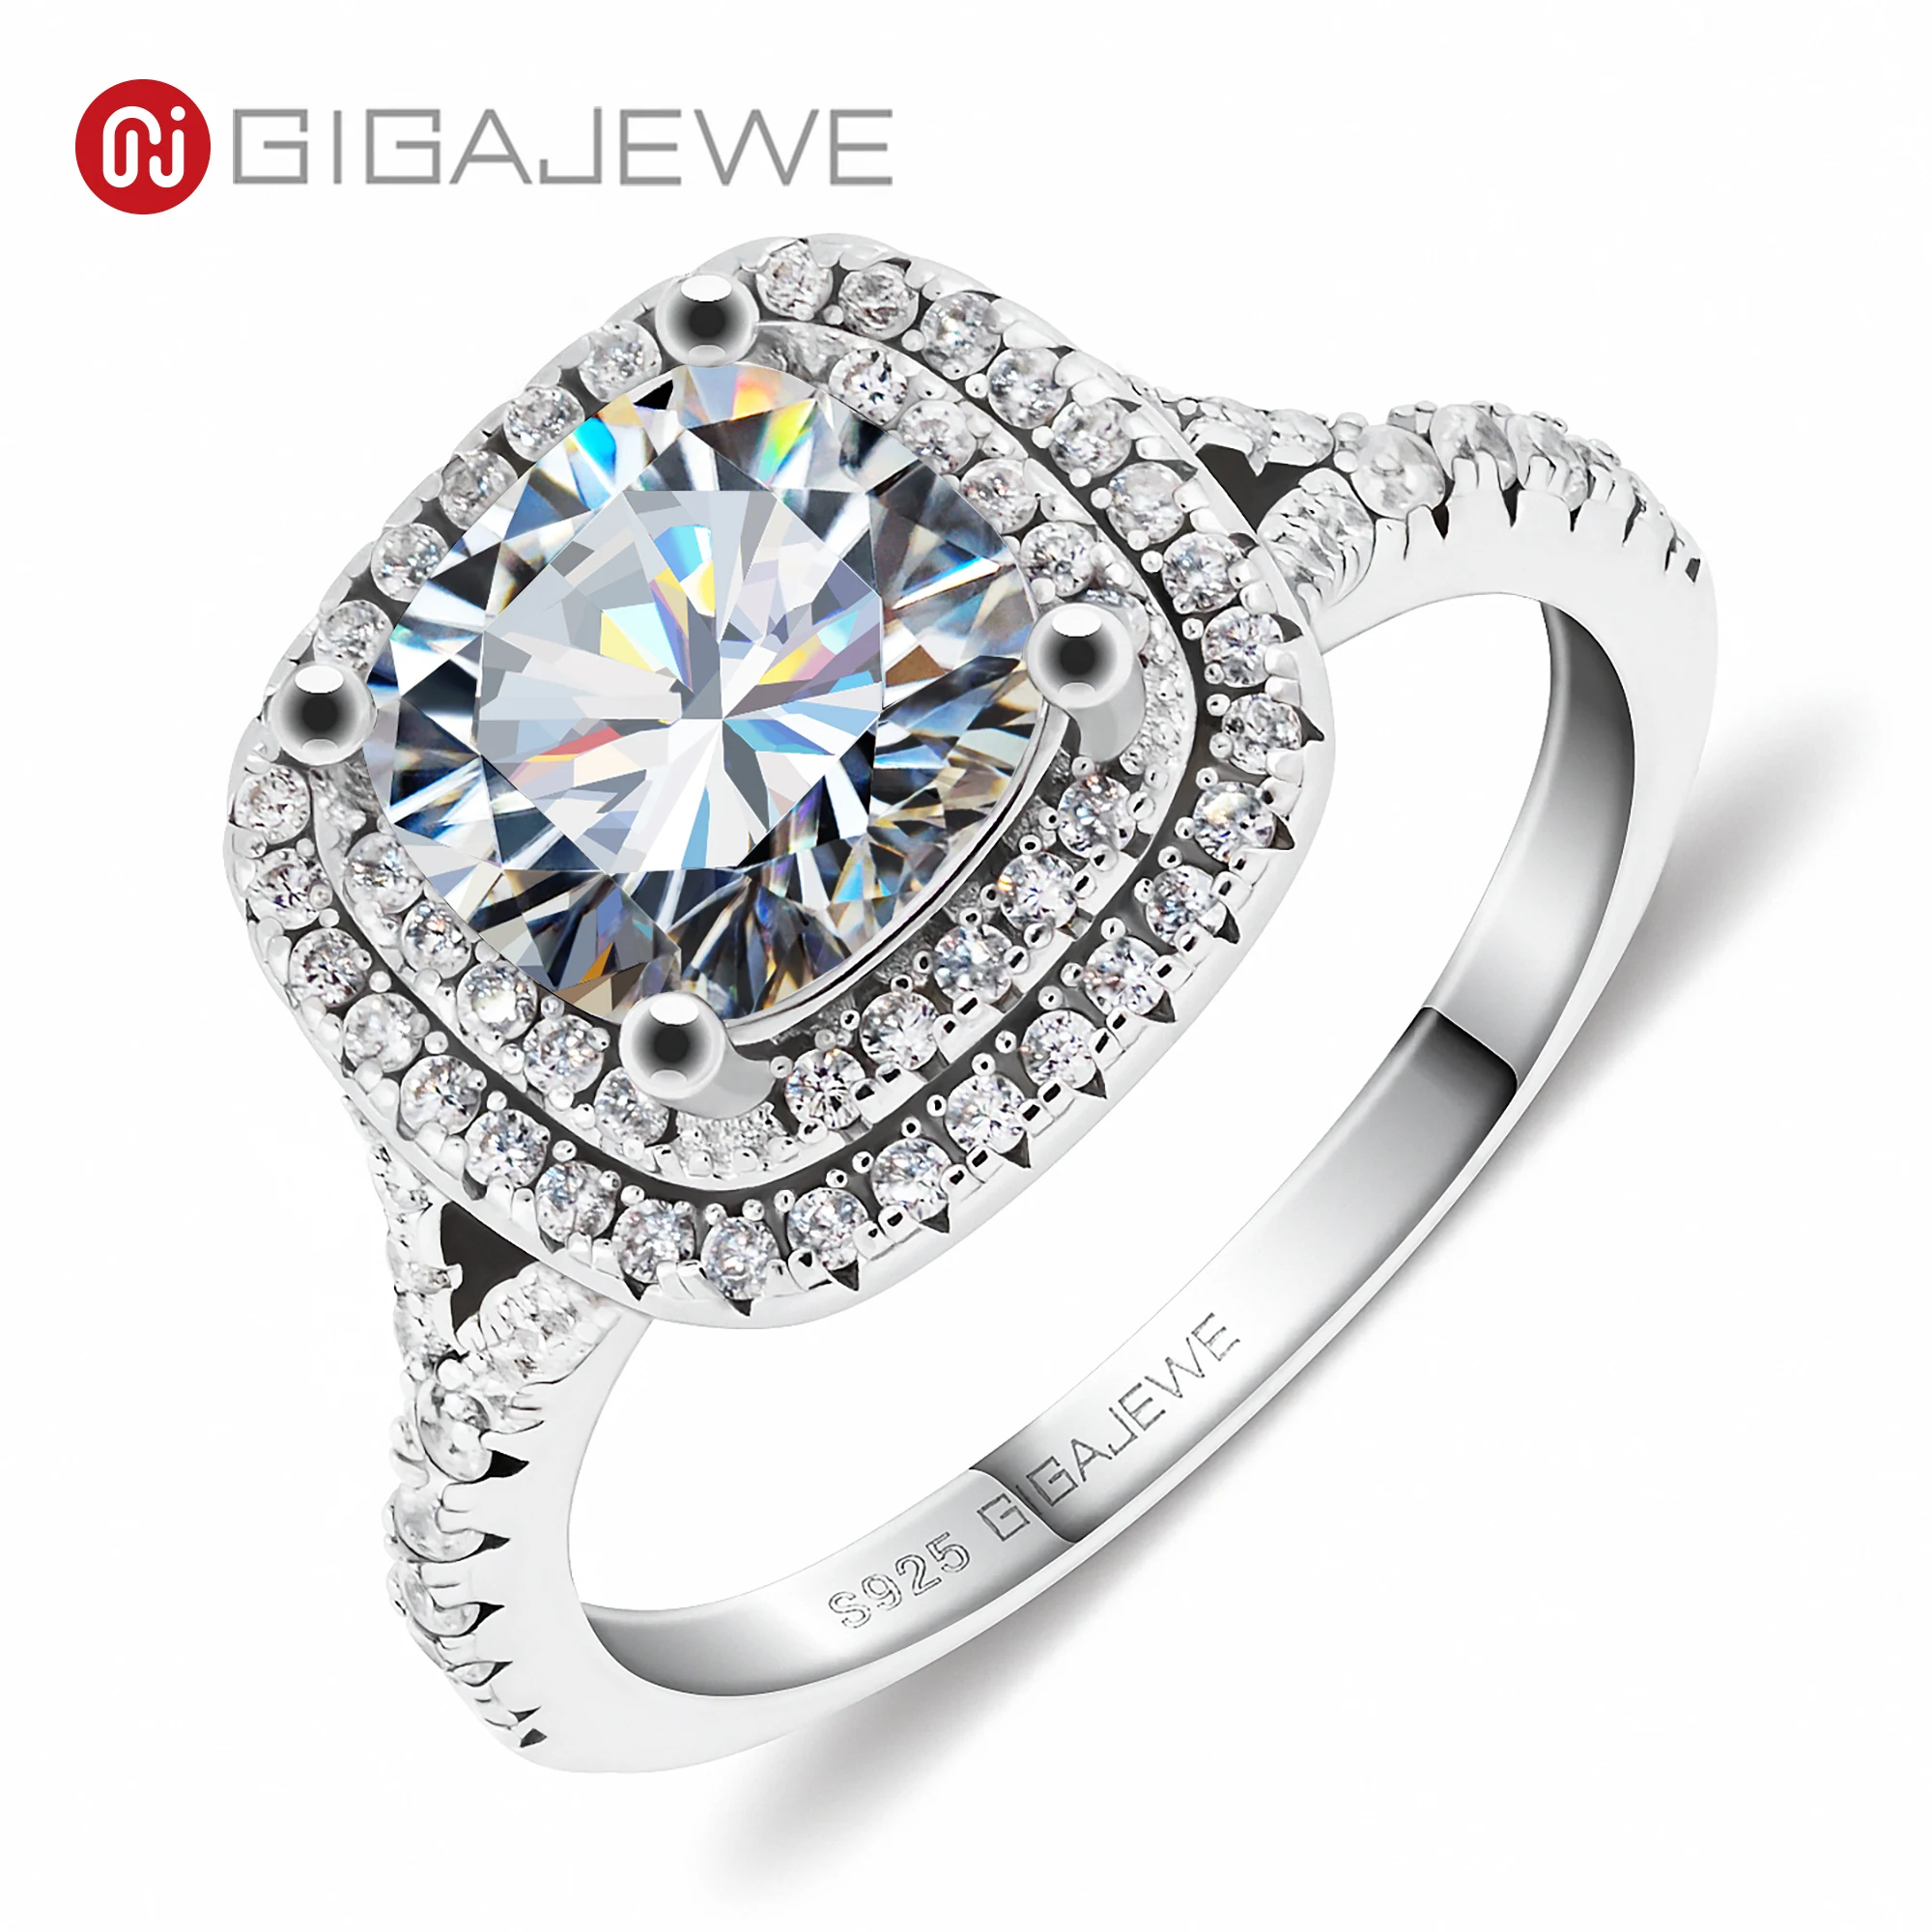 CZ Stone| Jewelry| Gold White Gold Engagement Ring 5 Ct Cushion Cut Diamond Halo Four Claw Wedding Engagement Ring 925 Sterling Silver